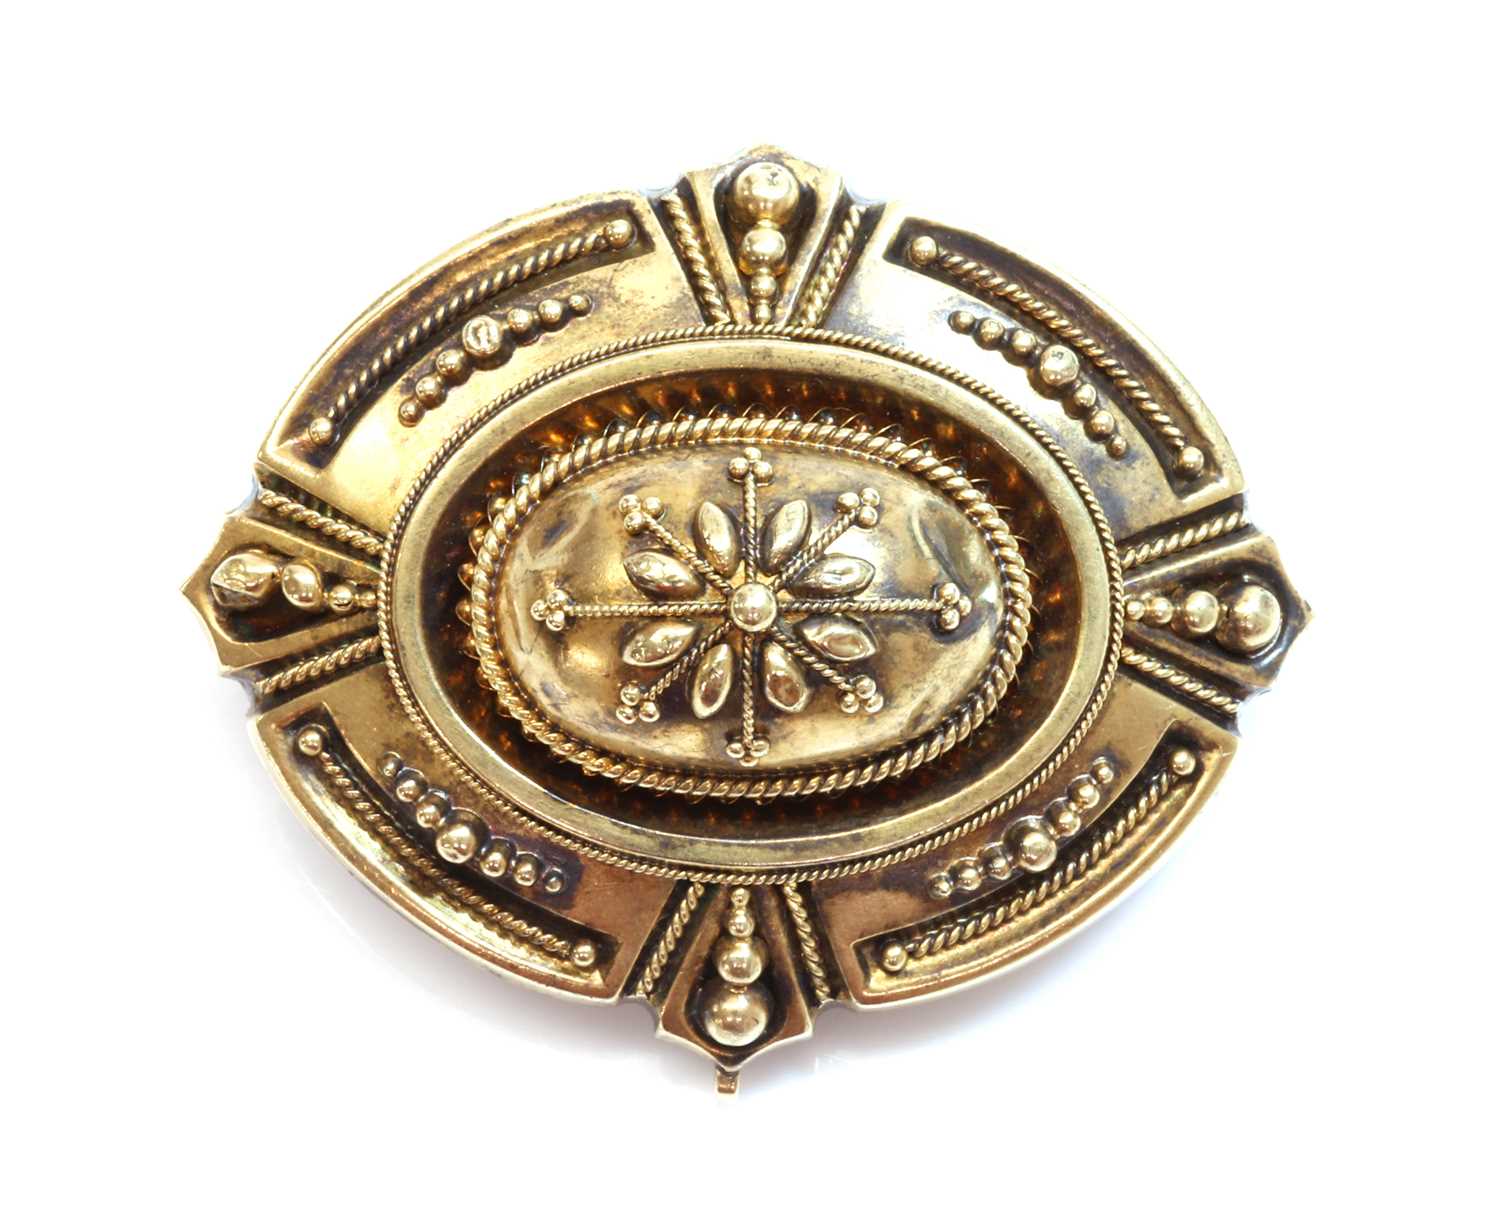 Lot 7 - A Victorian archaeological revival Etruscan style shield form brooch, c.1870